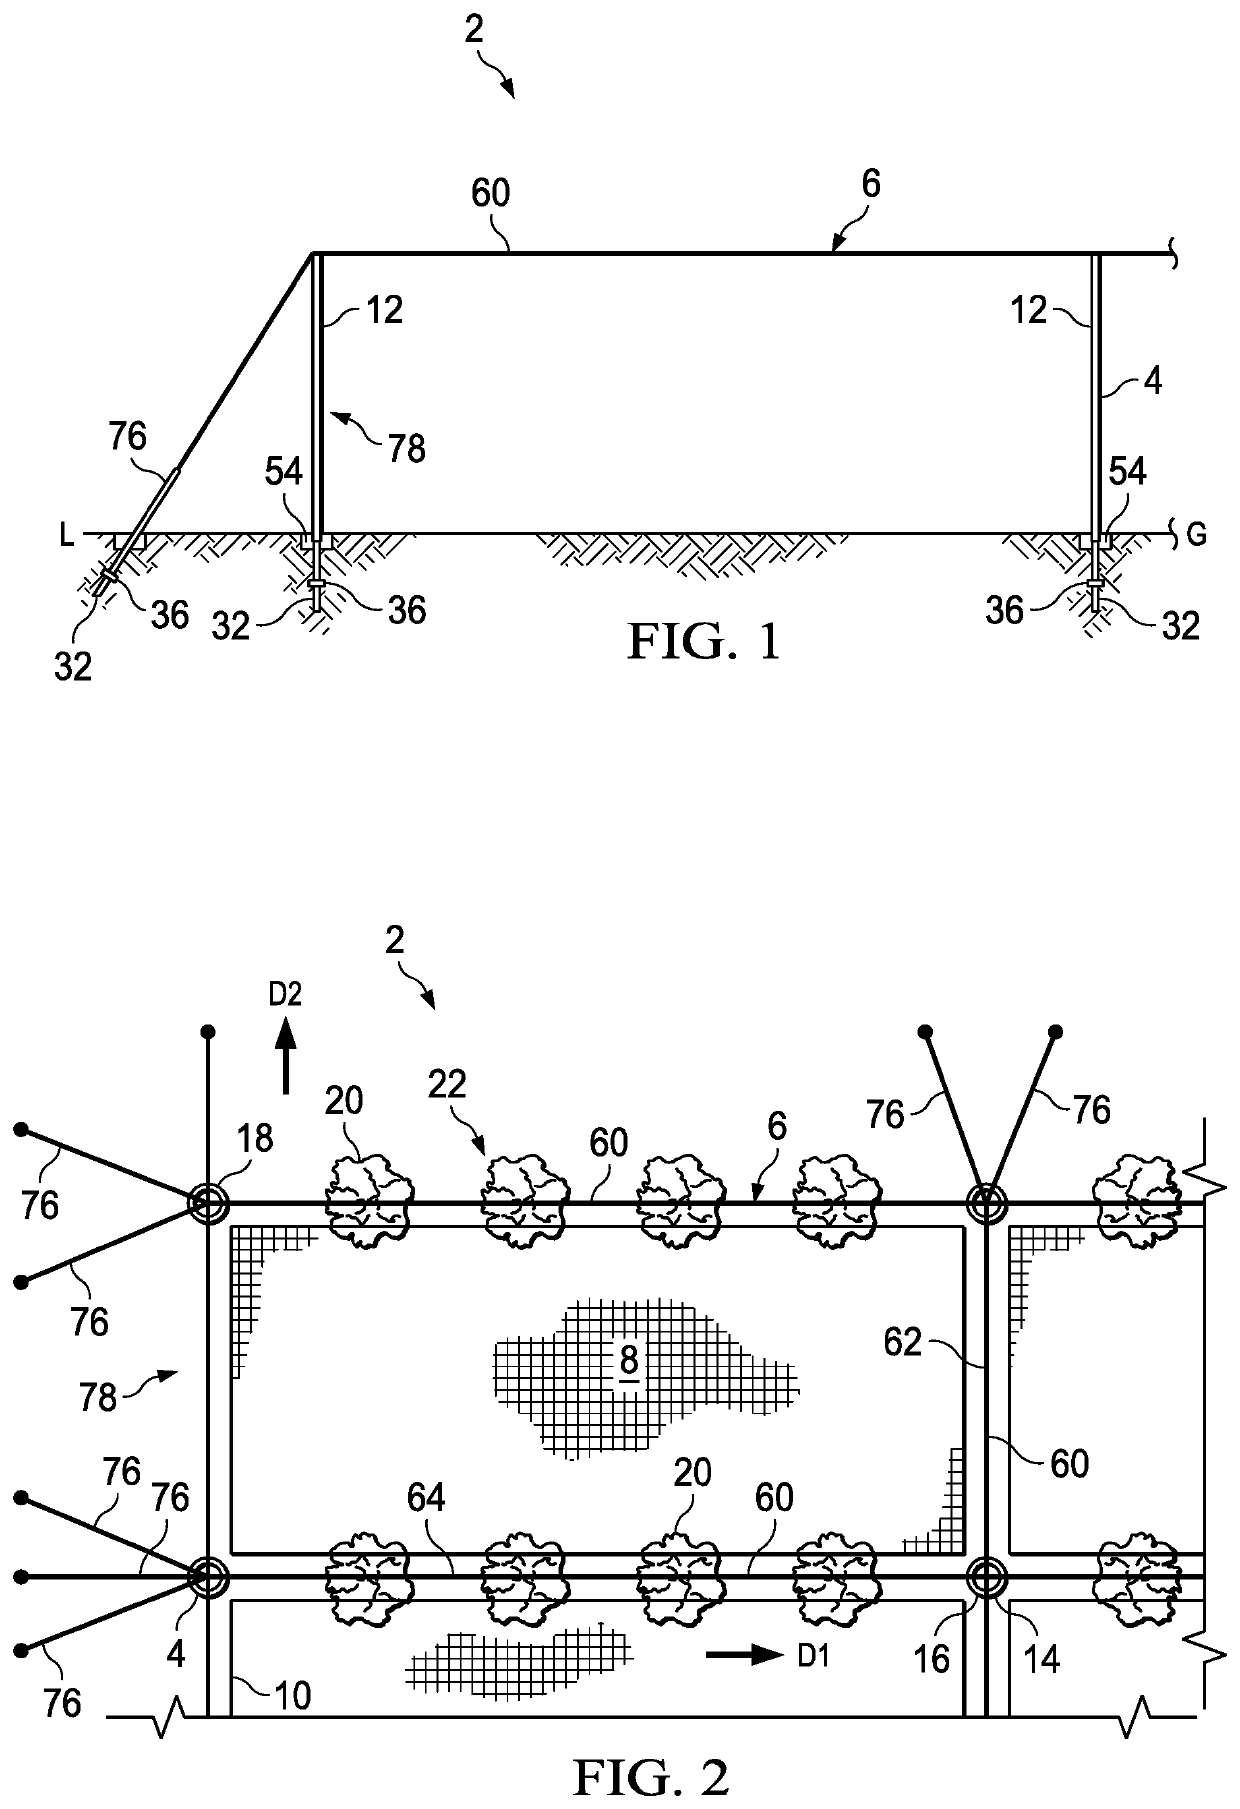 Netting installation for use in tree fruit production